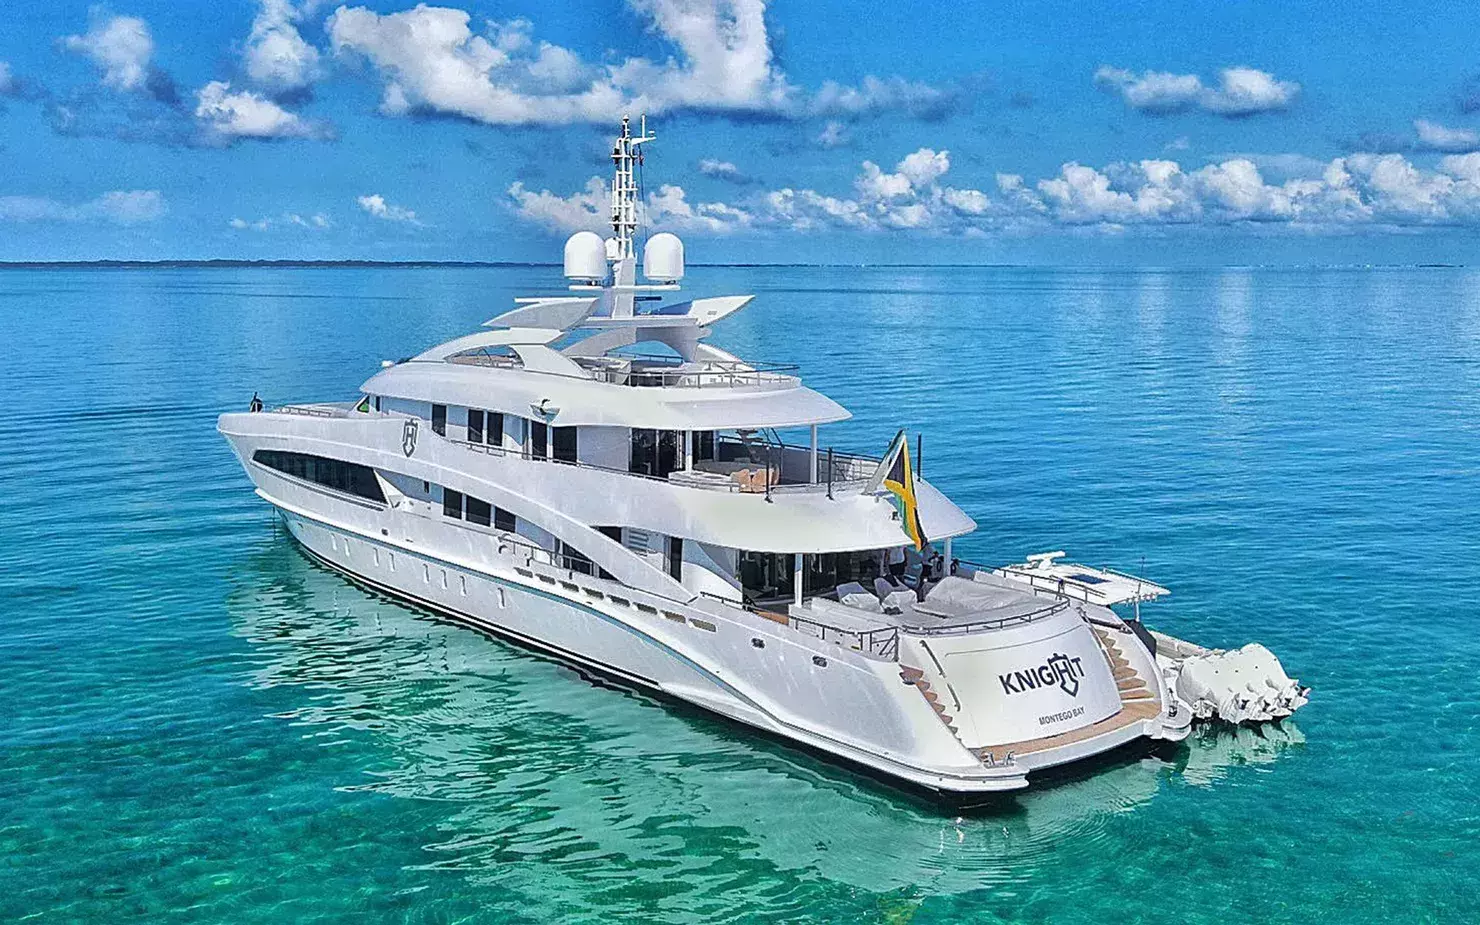 Knight by Heesen - Top rates for a Rental of a private Superyacht in Fiji